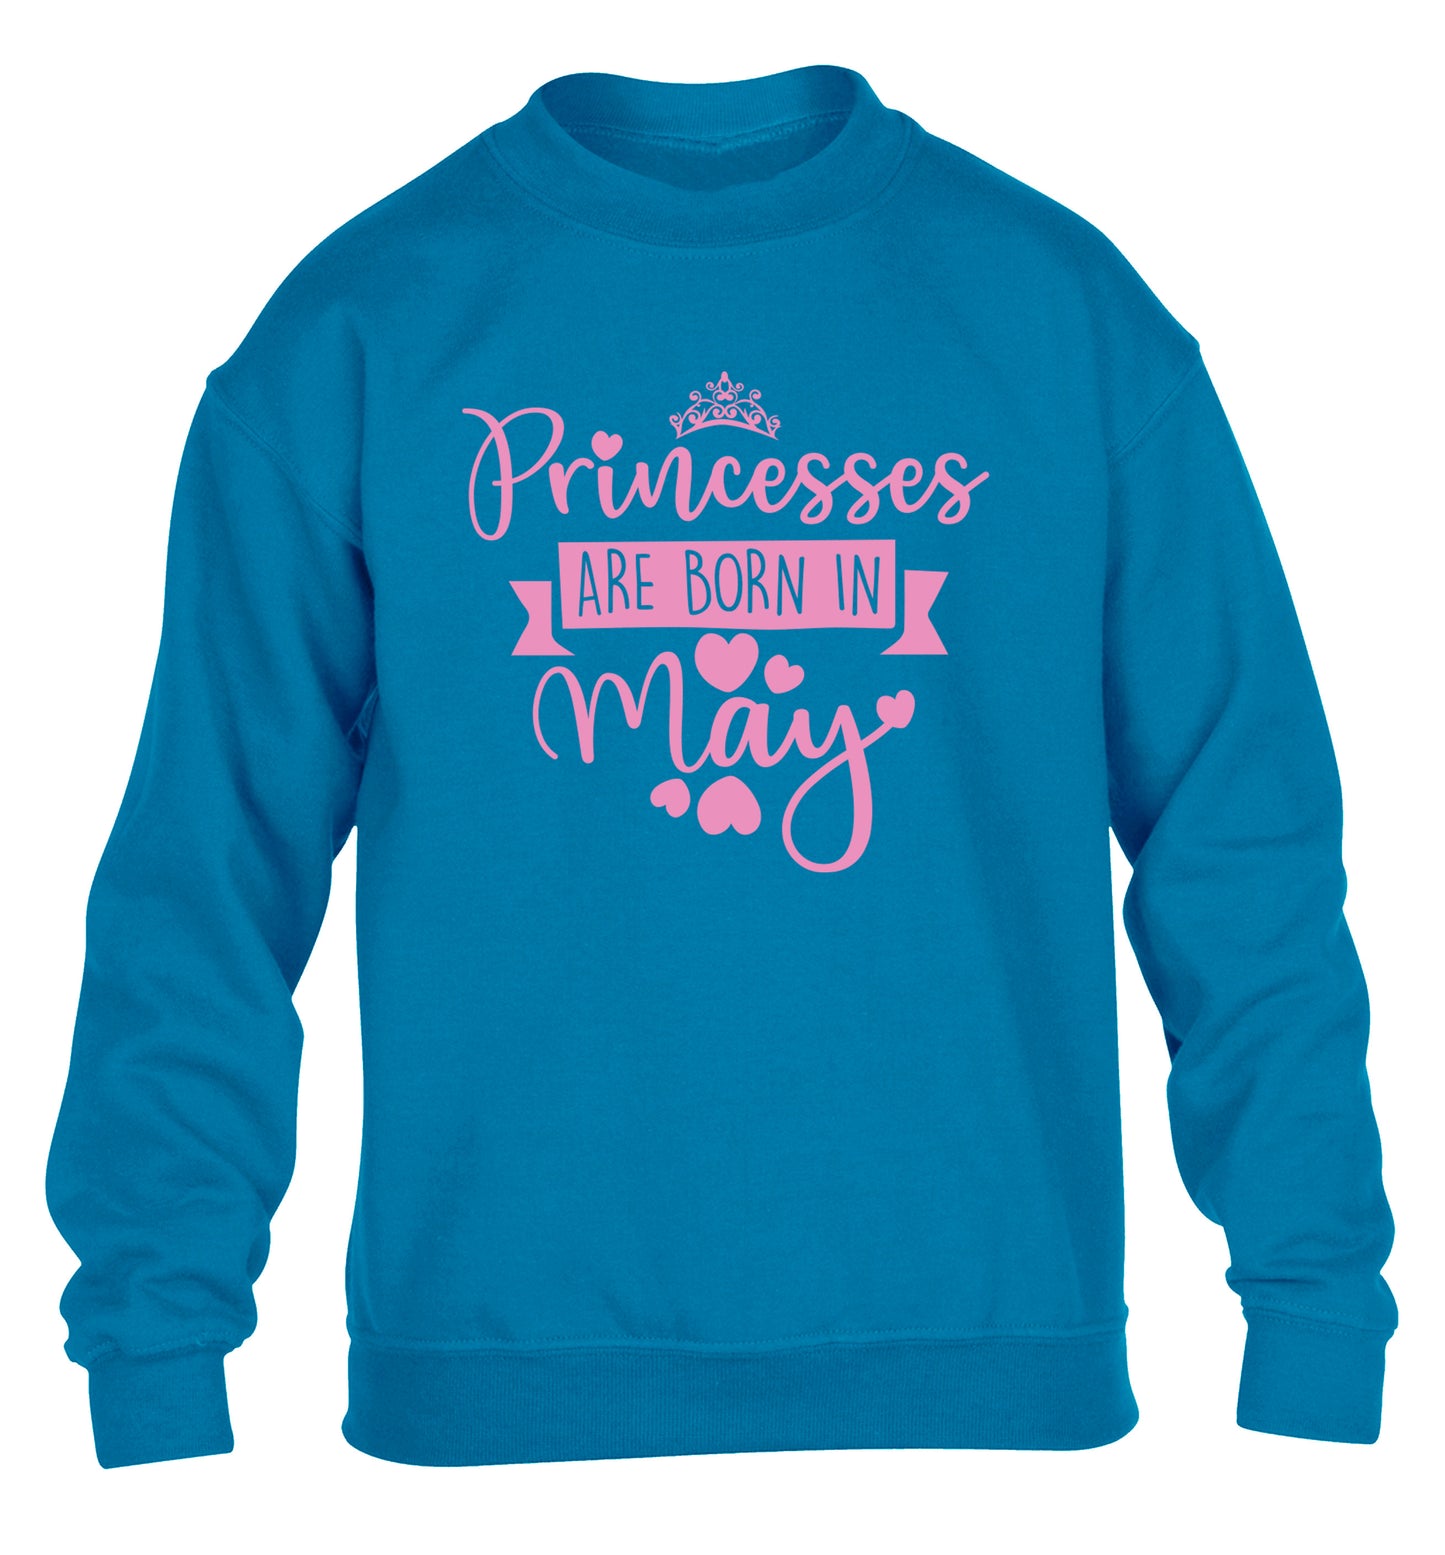 Princesses are born in May children's blue sweater 12-13 Years